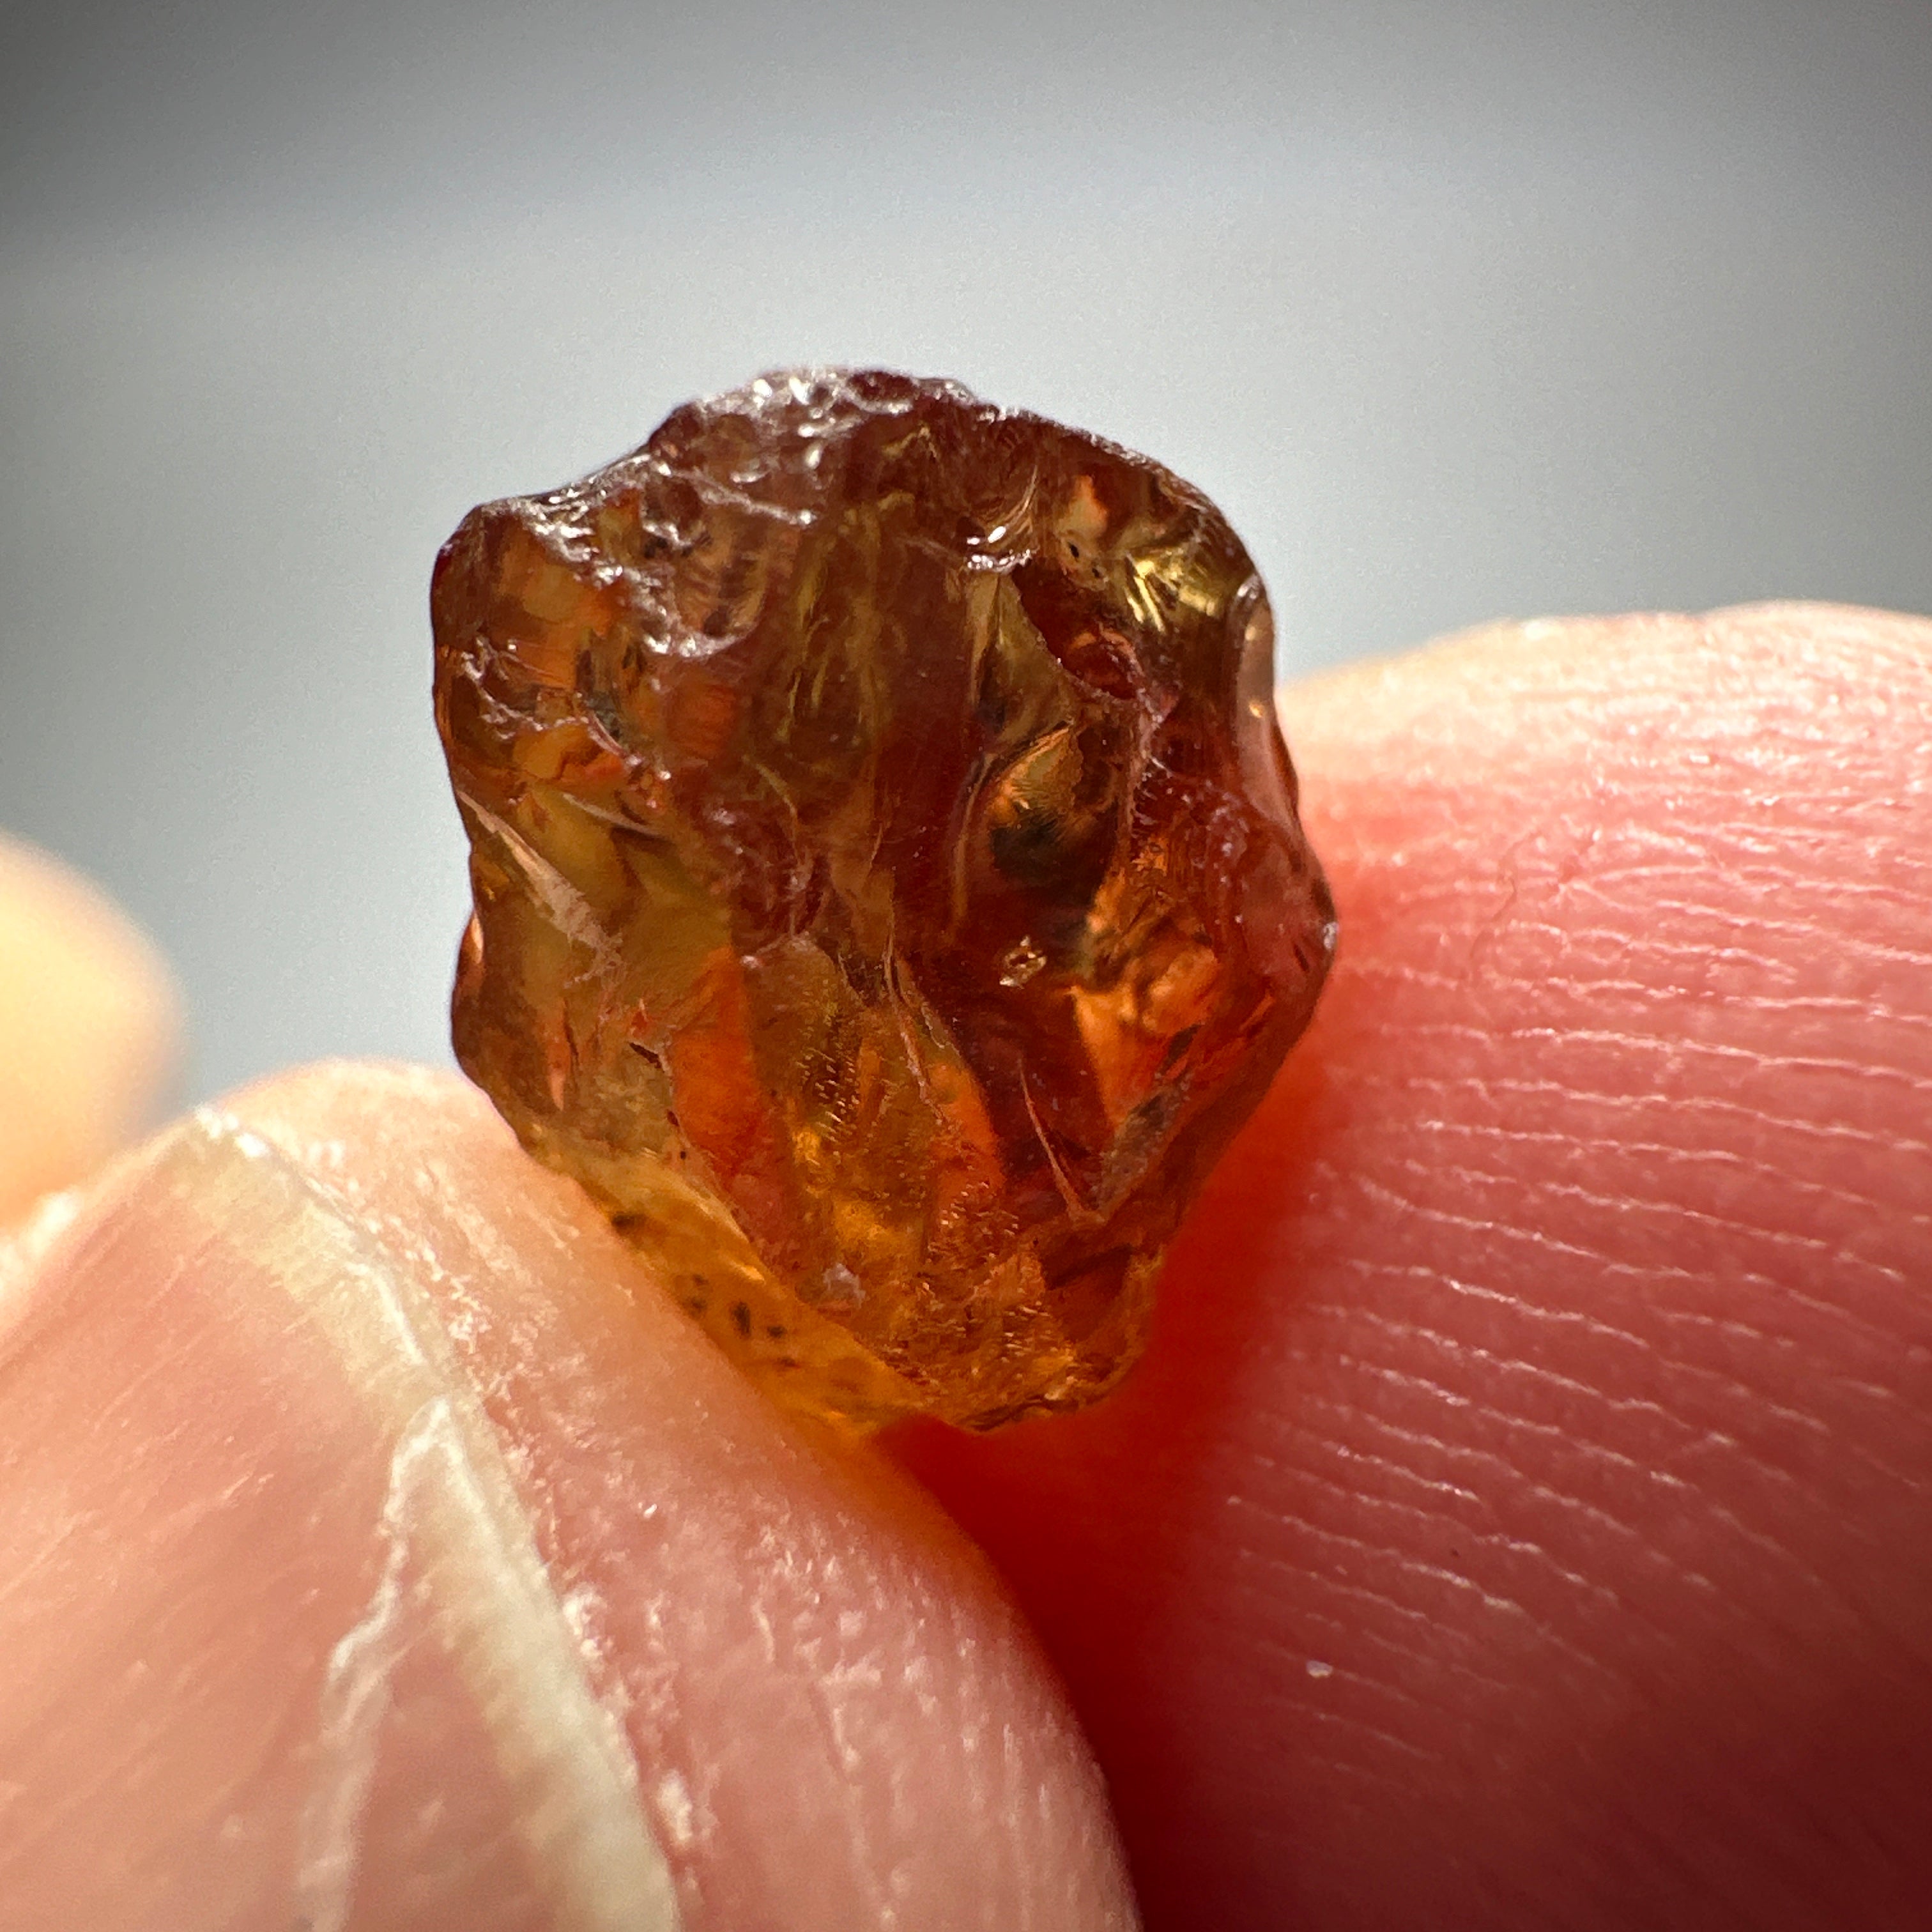 4.75ct Colour Change Garnet, Tanzania, Untreated Unheated, one spot on the outside, rest vvs-if